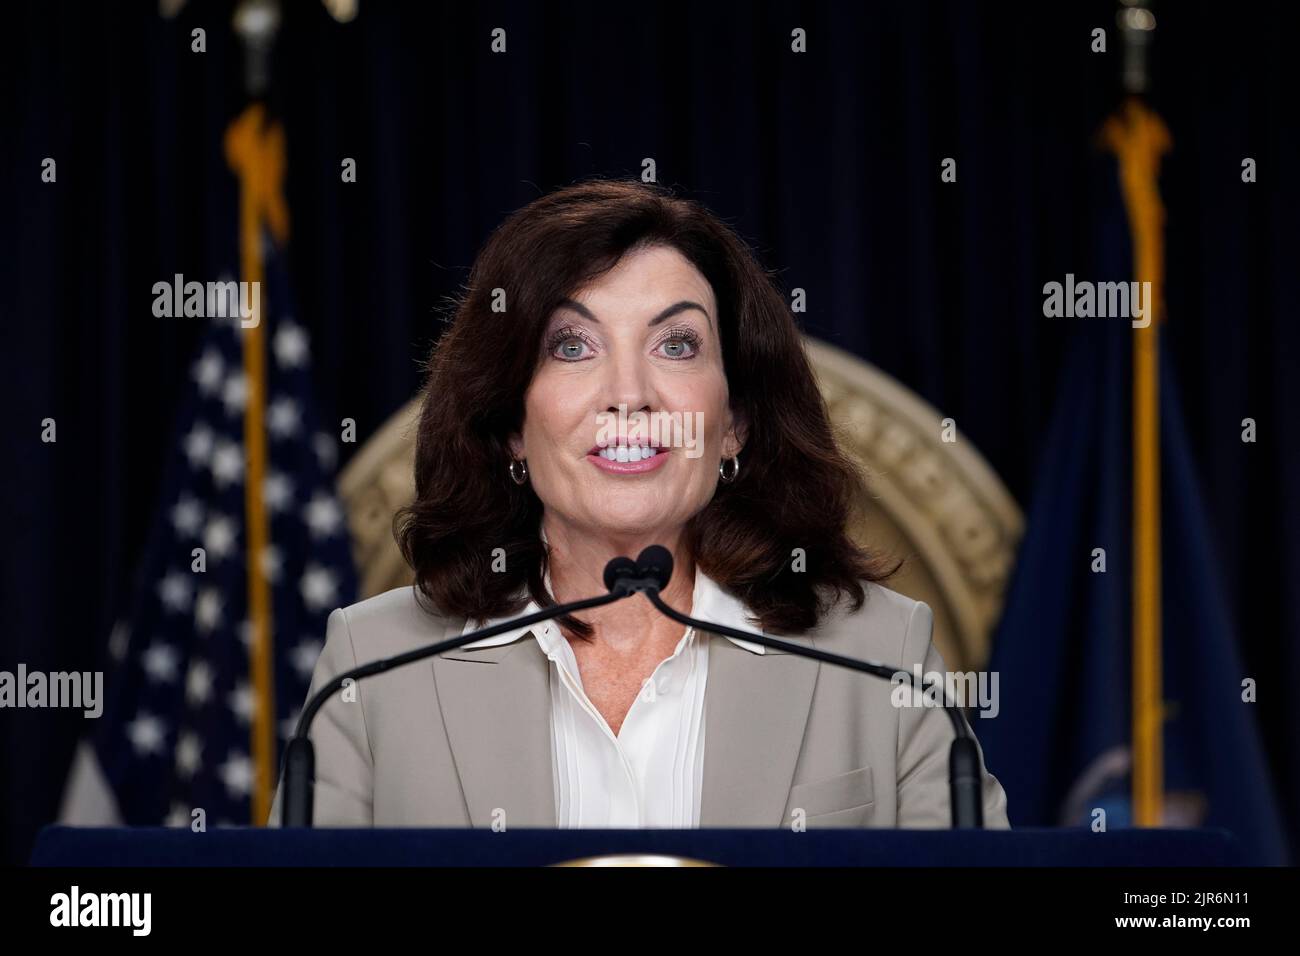 New York City, USA. 22nd Aug, 2022. New York State Governor Kathy Hochul speaks during a health department press briefing in Midtown on August 22, 2022 in New York City, USA. Governor Hochul reiterated COVID-19 Federal CDC guidelines for schools while the NYS Health commissioner outlined necessary steps to combatting Monkeypox and the resurgence of Polio. ( Photo by John Lamparski/Sipa USA) Credit: Sipa USA/Alamy Live News Stock Photo